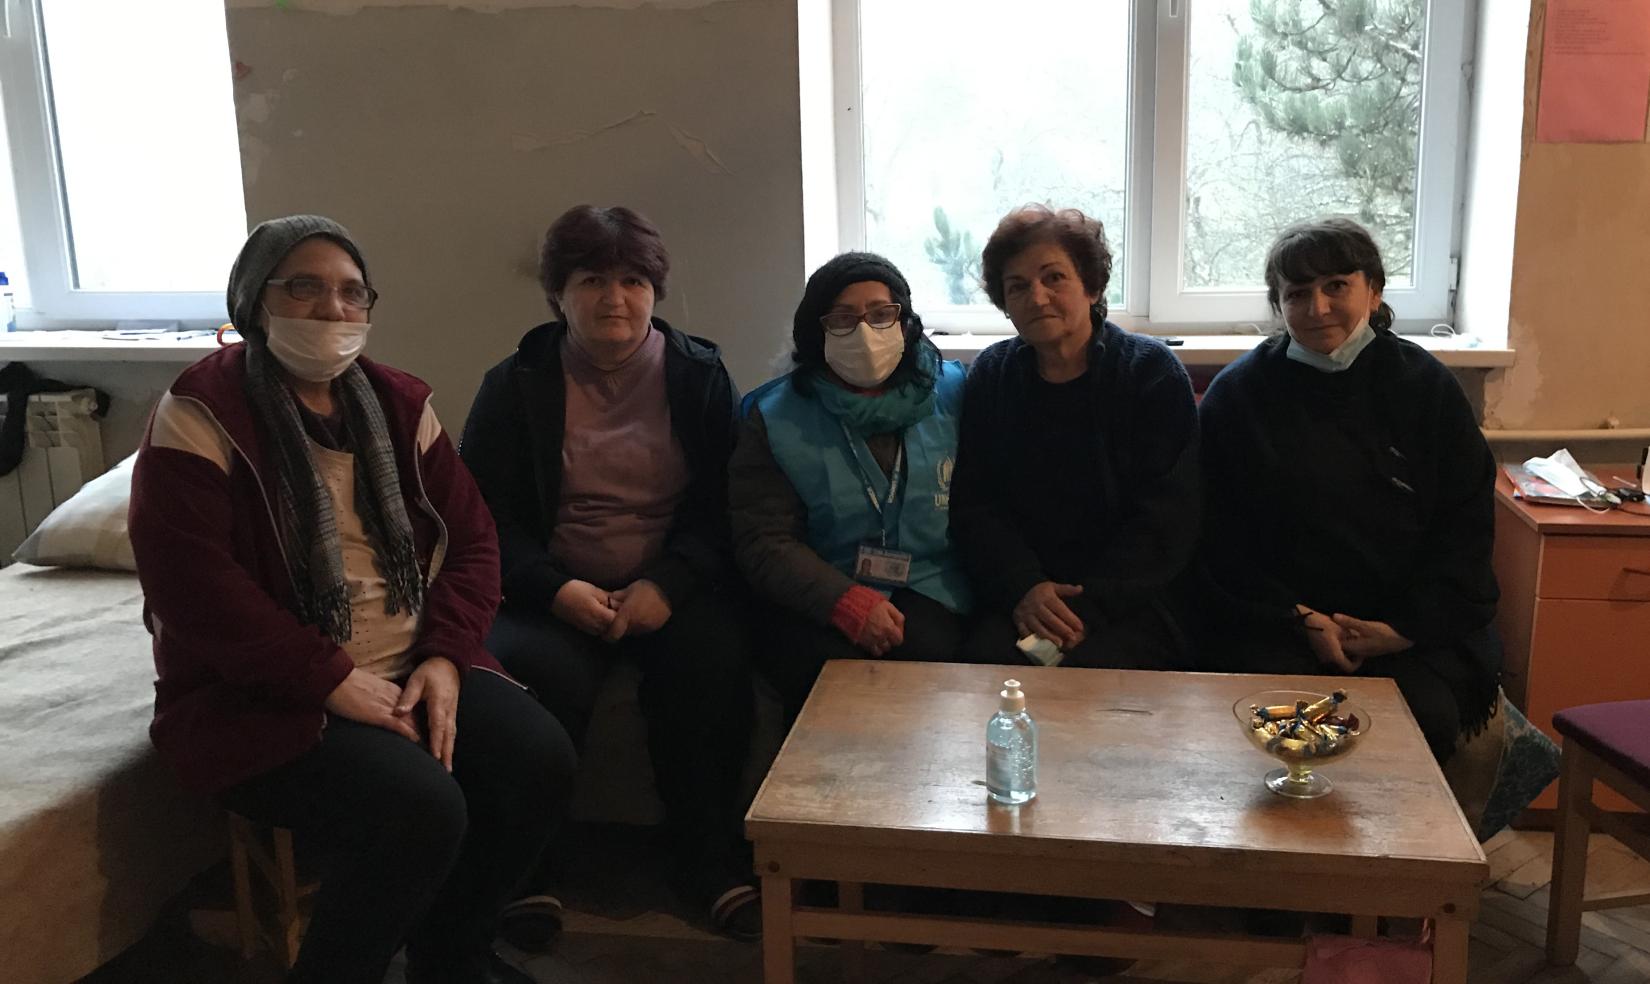 Women in a refugee-like situation share a room in a former boarding school currently used as an emergency shelter in Dilijan, Tavush Province, Armenia.